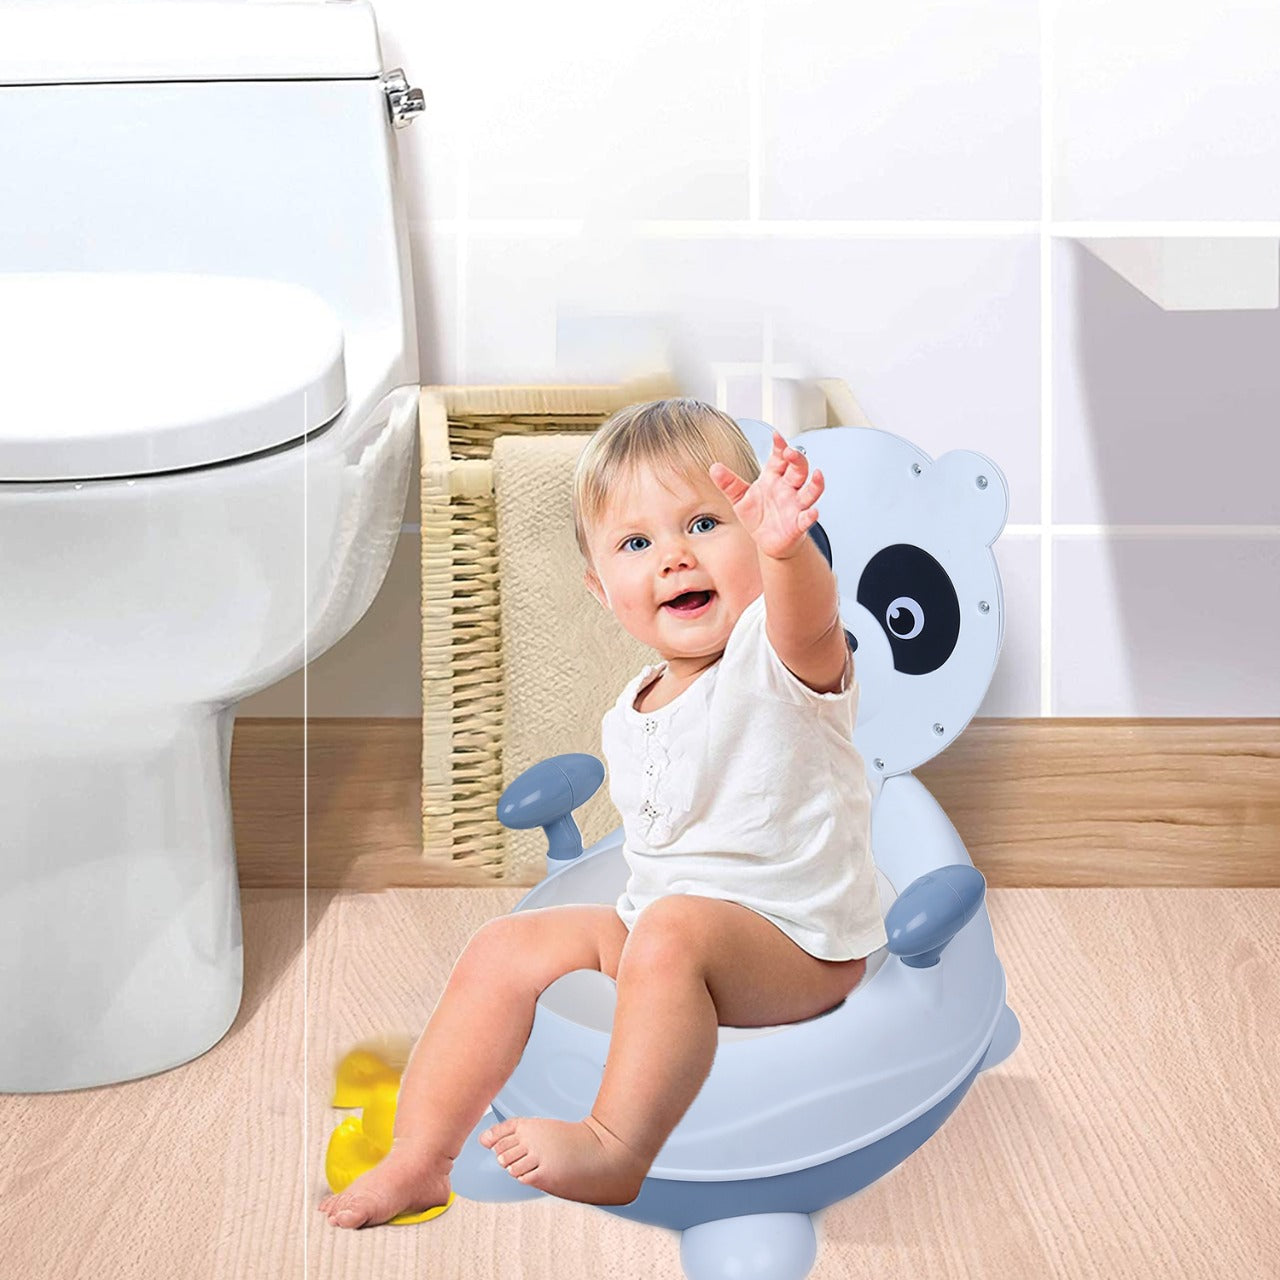 Baby Moo Panda Detachable Lid With Handle For Toilet Training Potty Chair - White